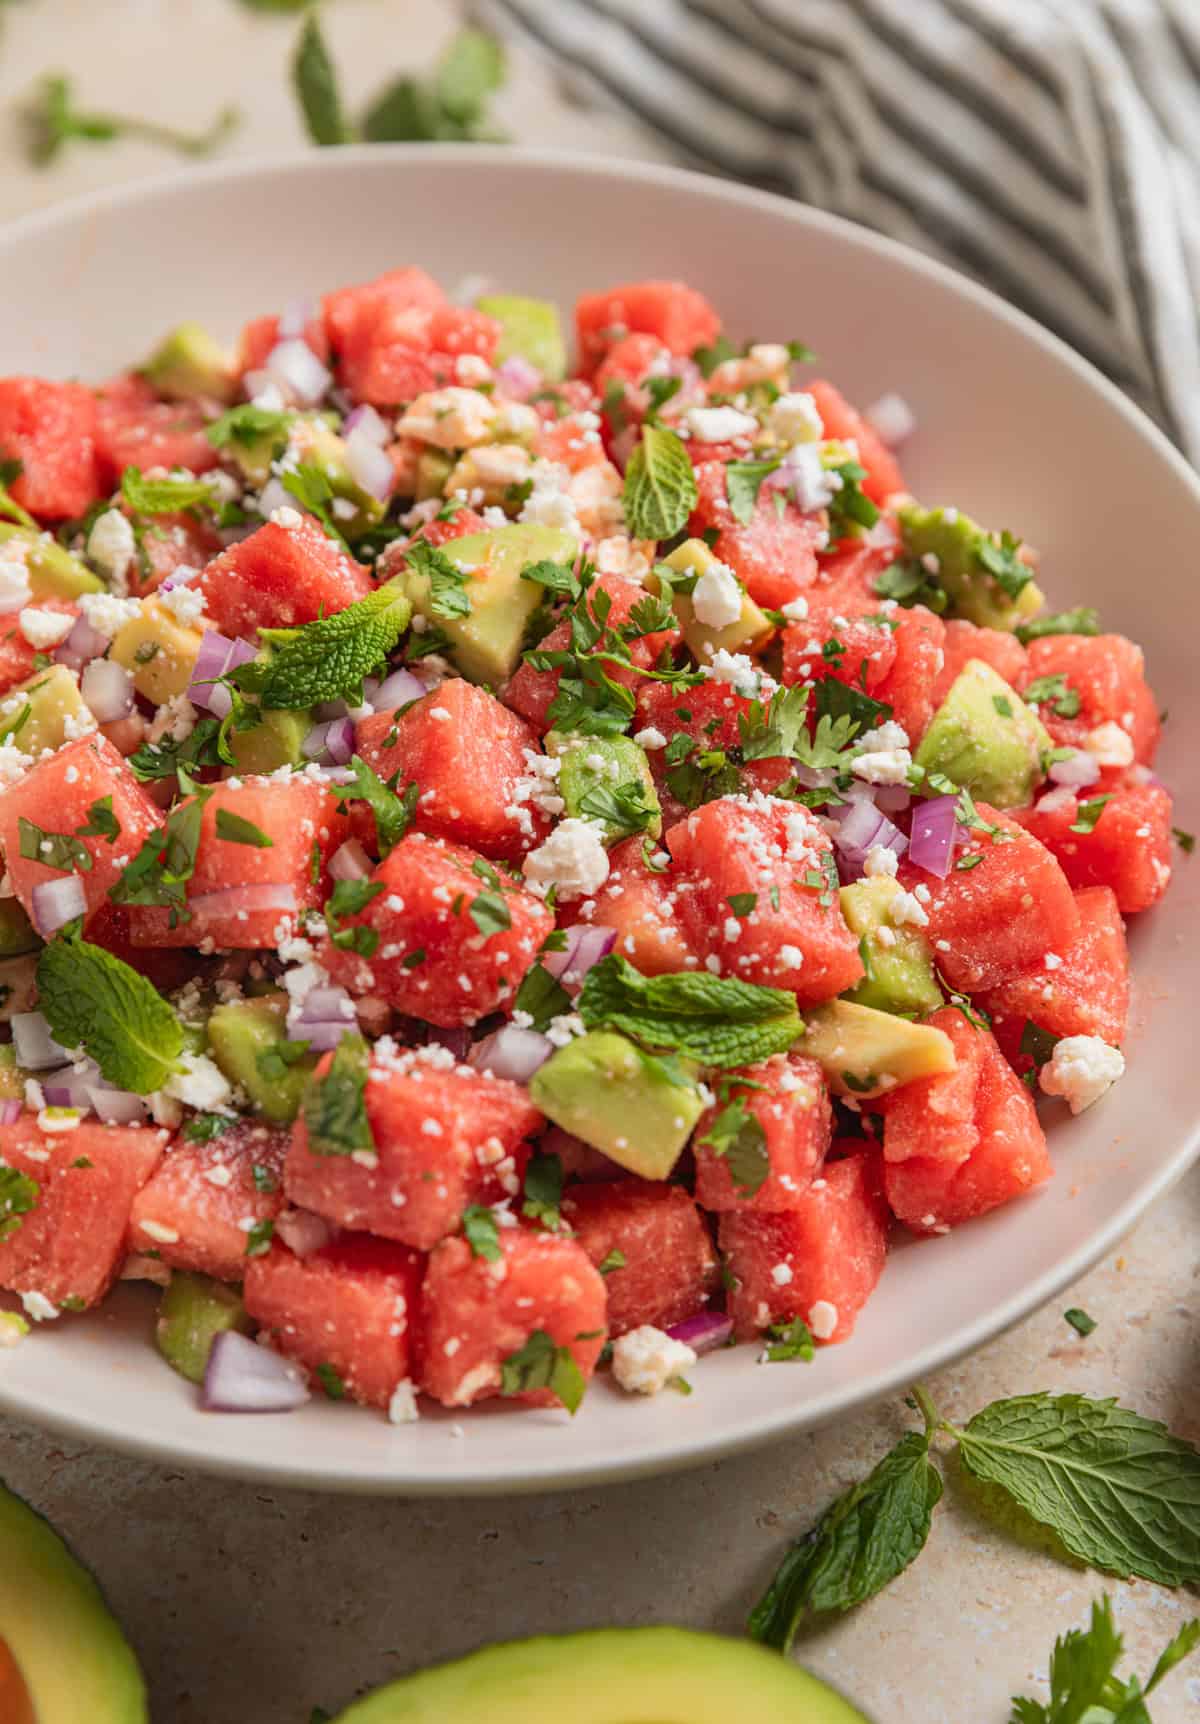 Watermelon salad with cubed avocado and feta in bowl topped with chopped cilantro and mint leaves.